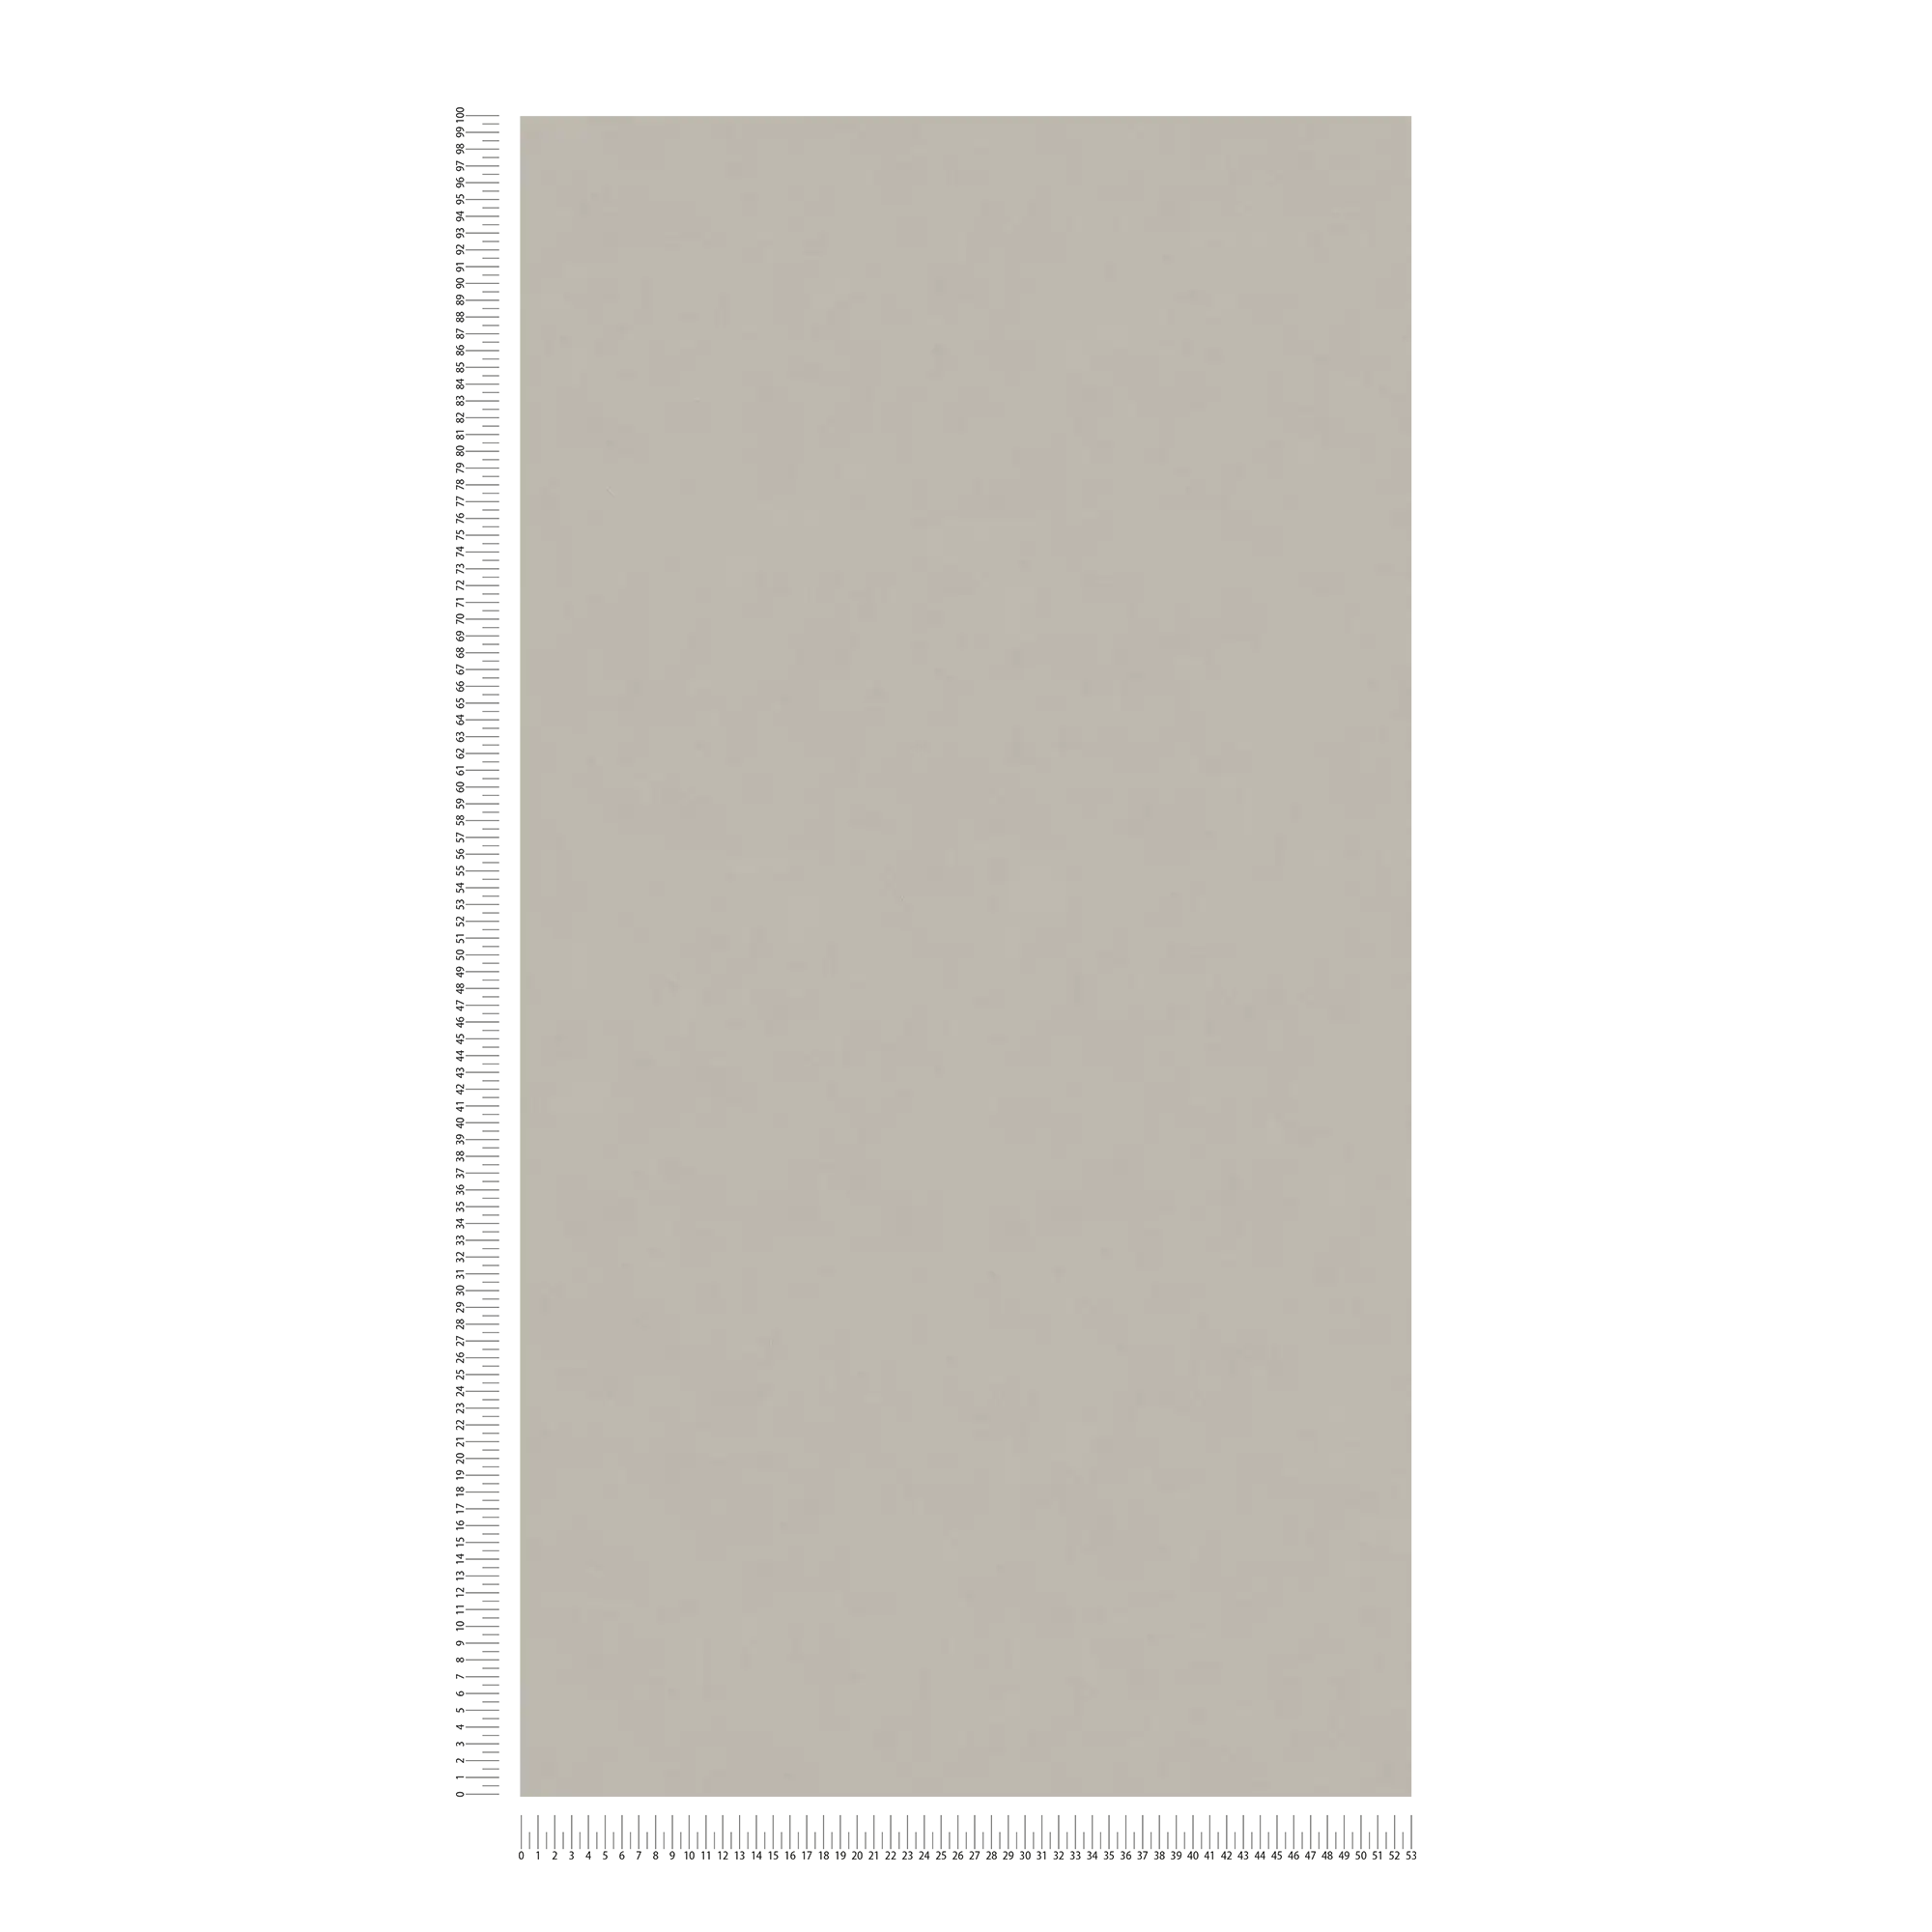             Plain non-woven wallpaper trowel plaster look - grey, taupe
        